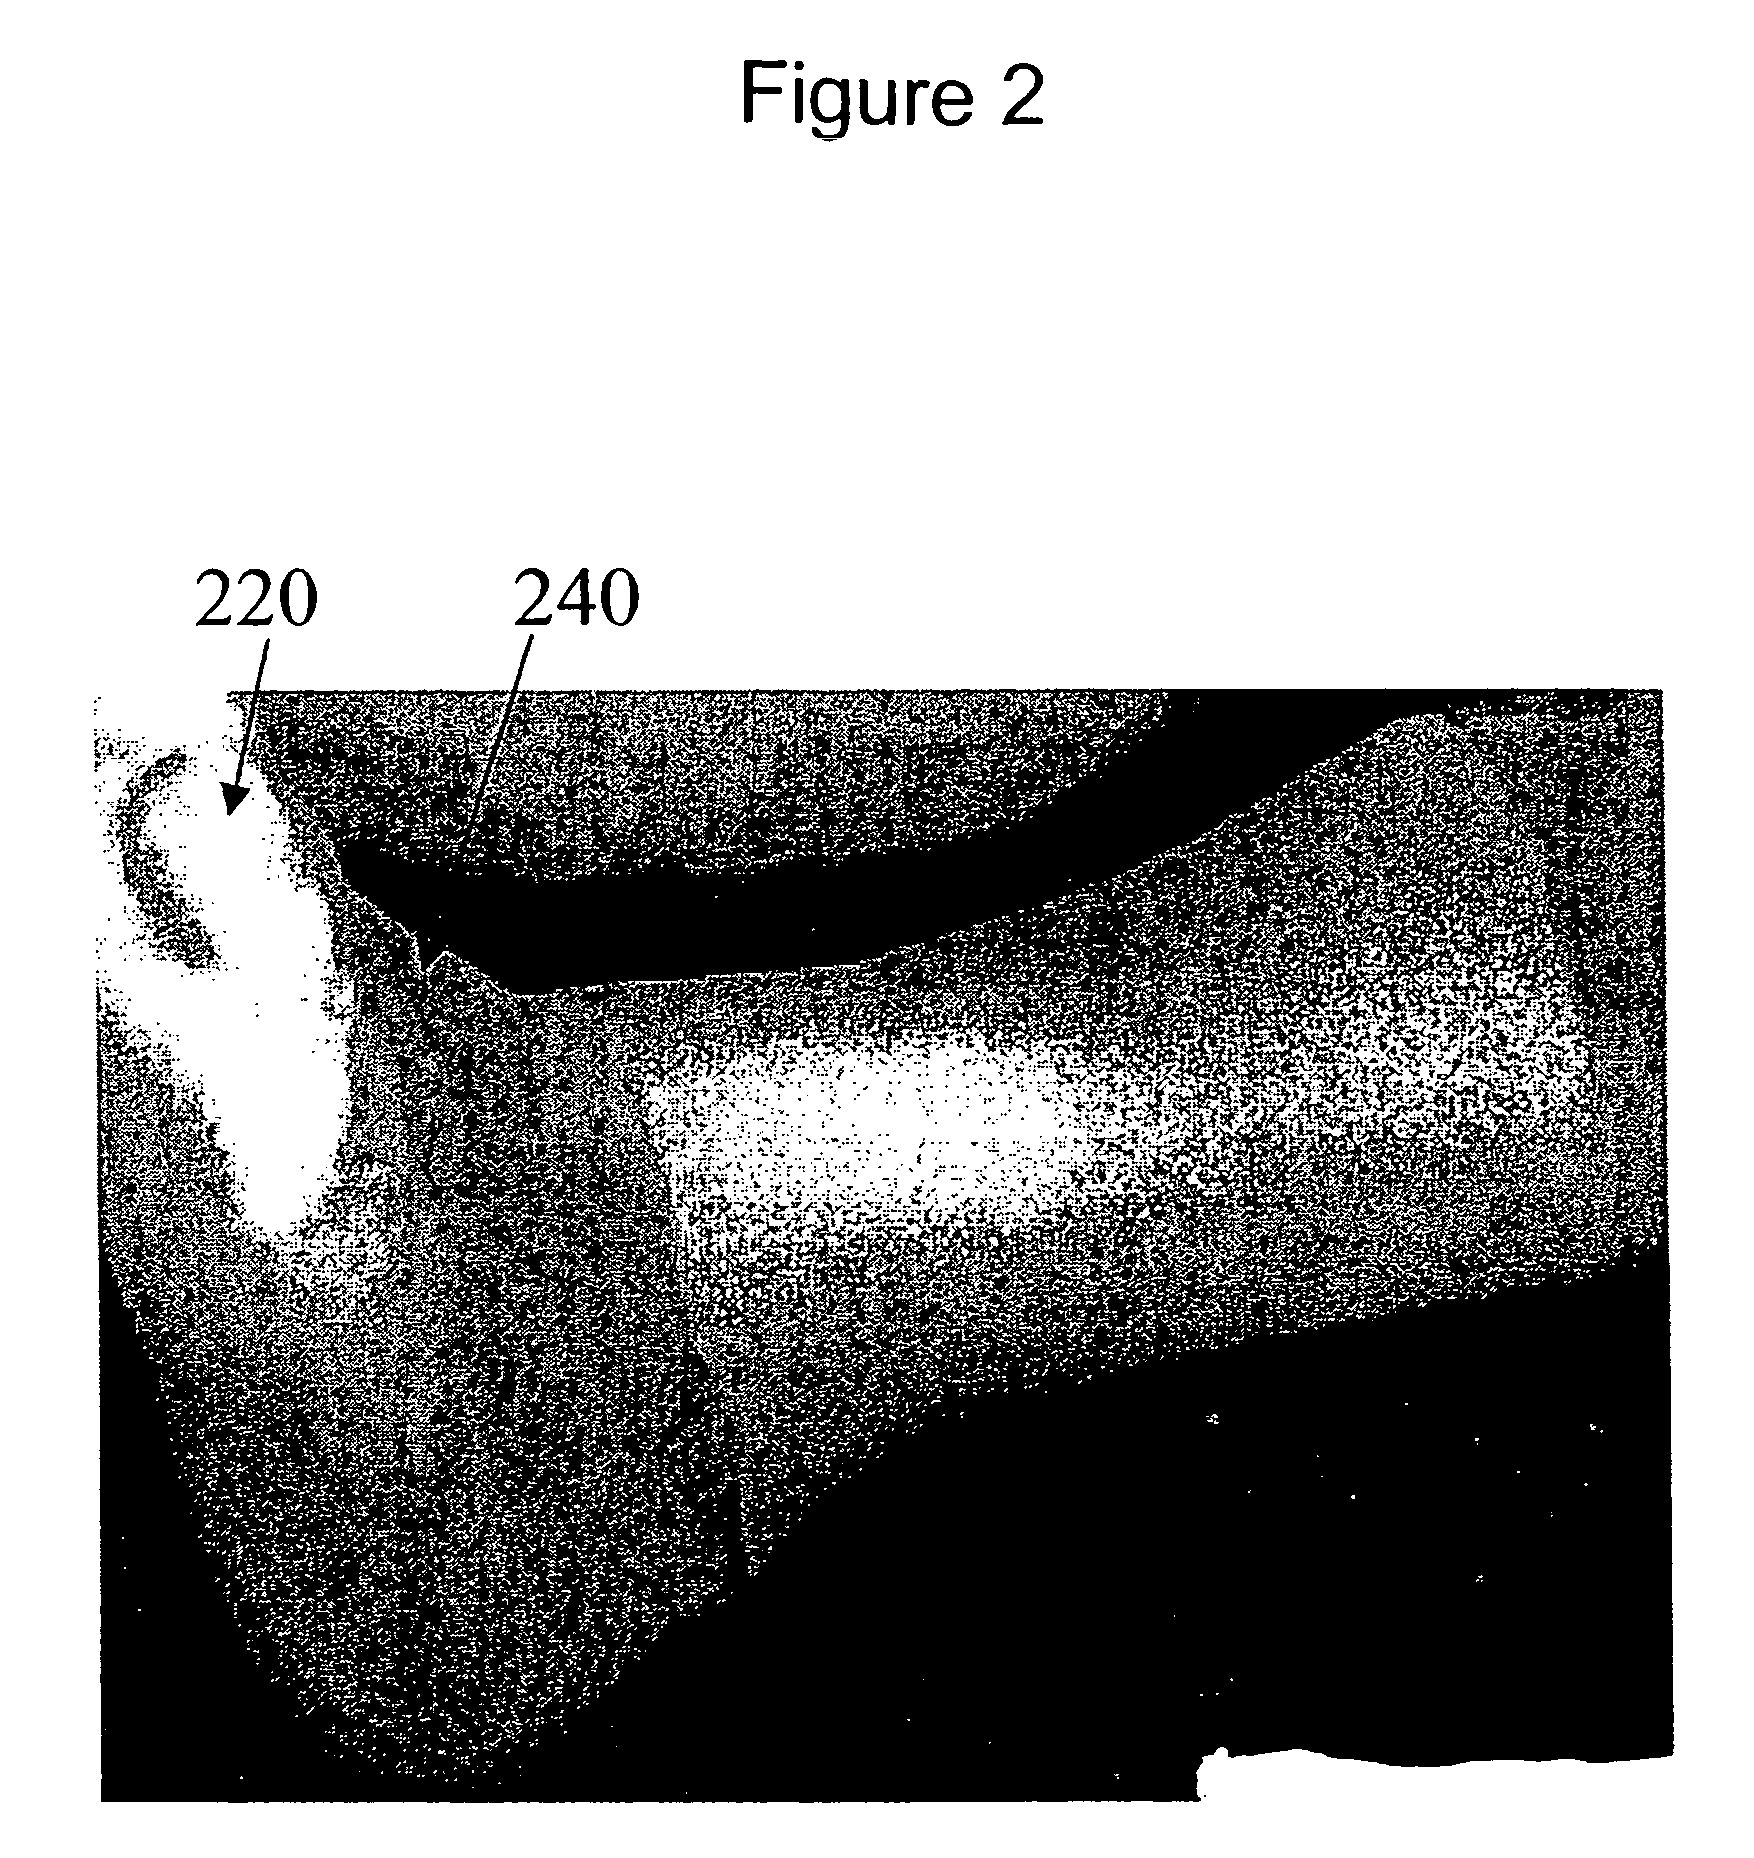 Hyperspectral imaging calibration device